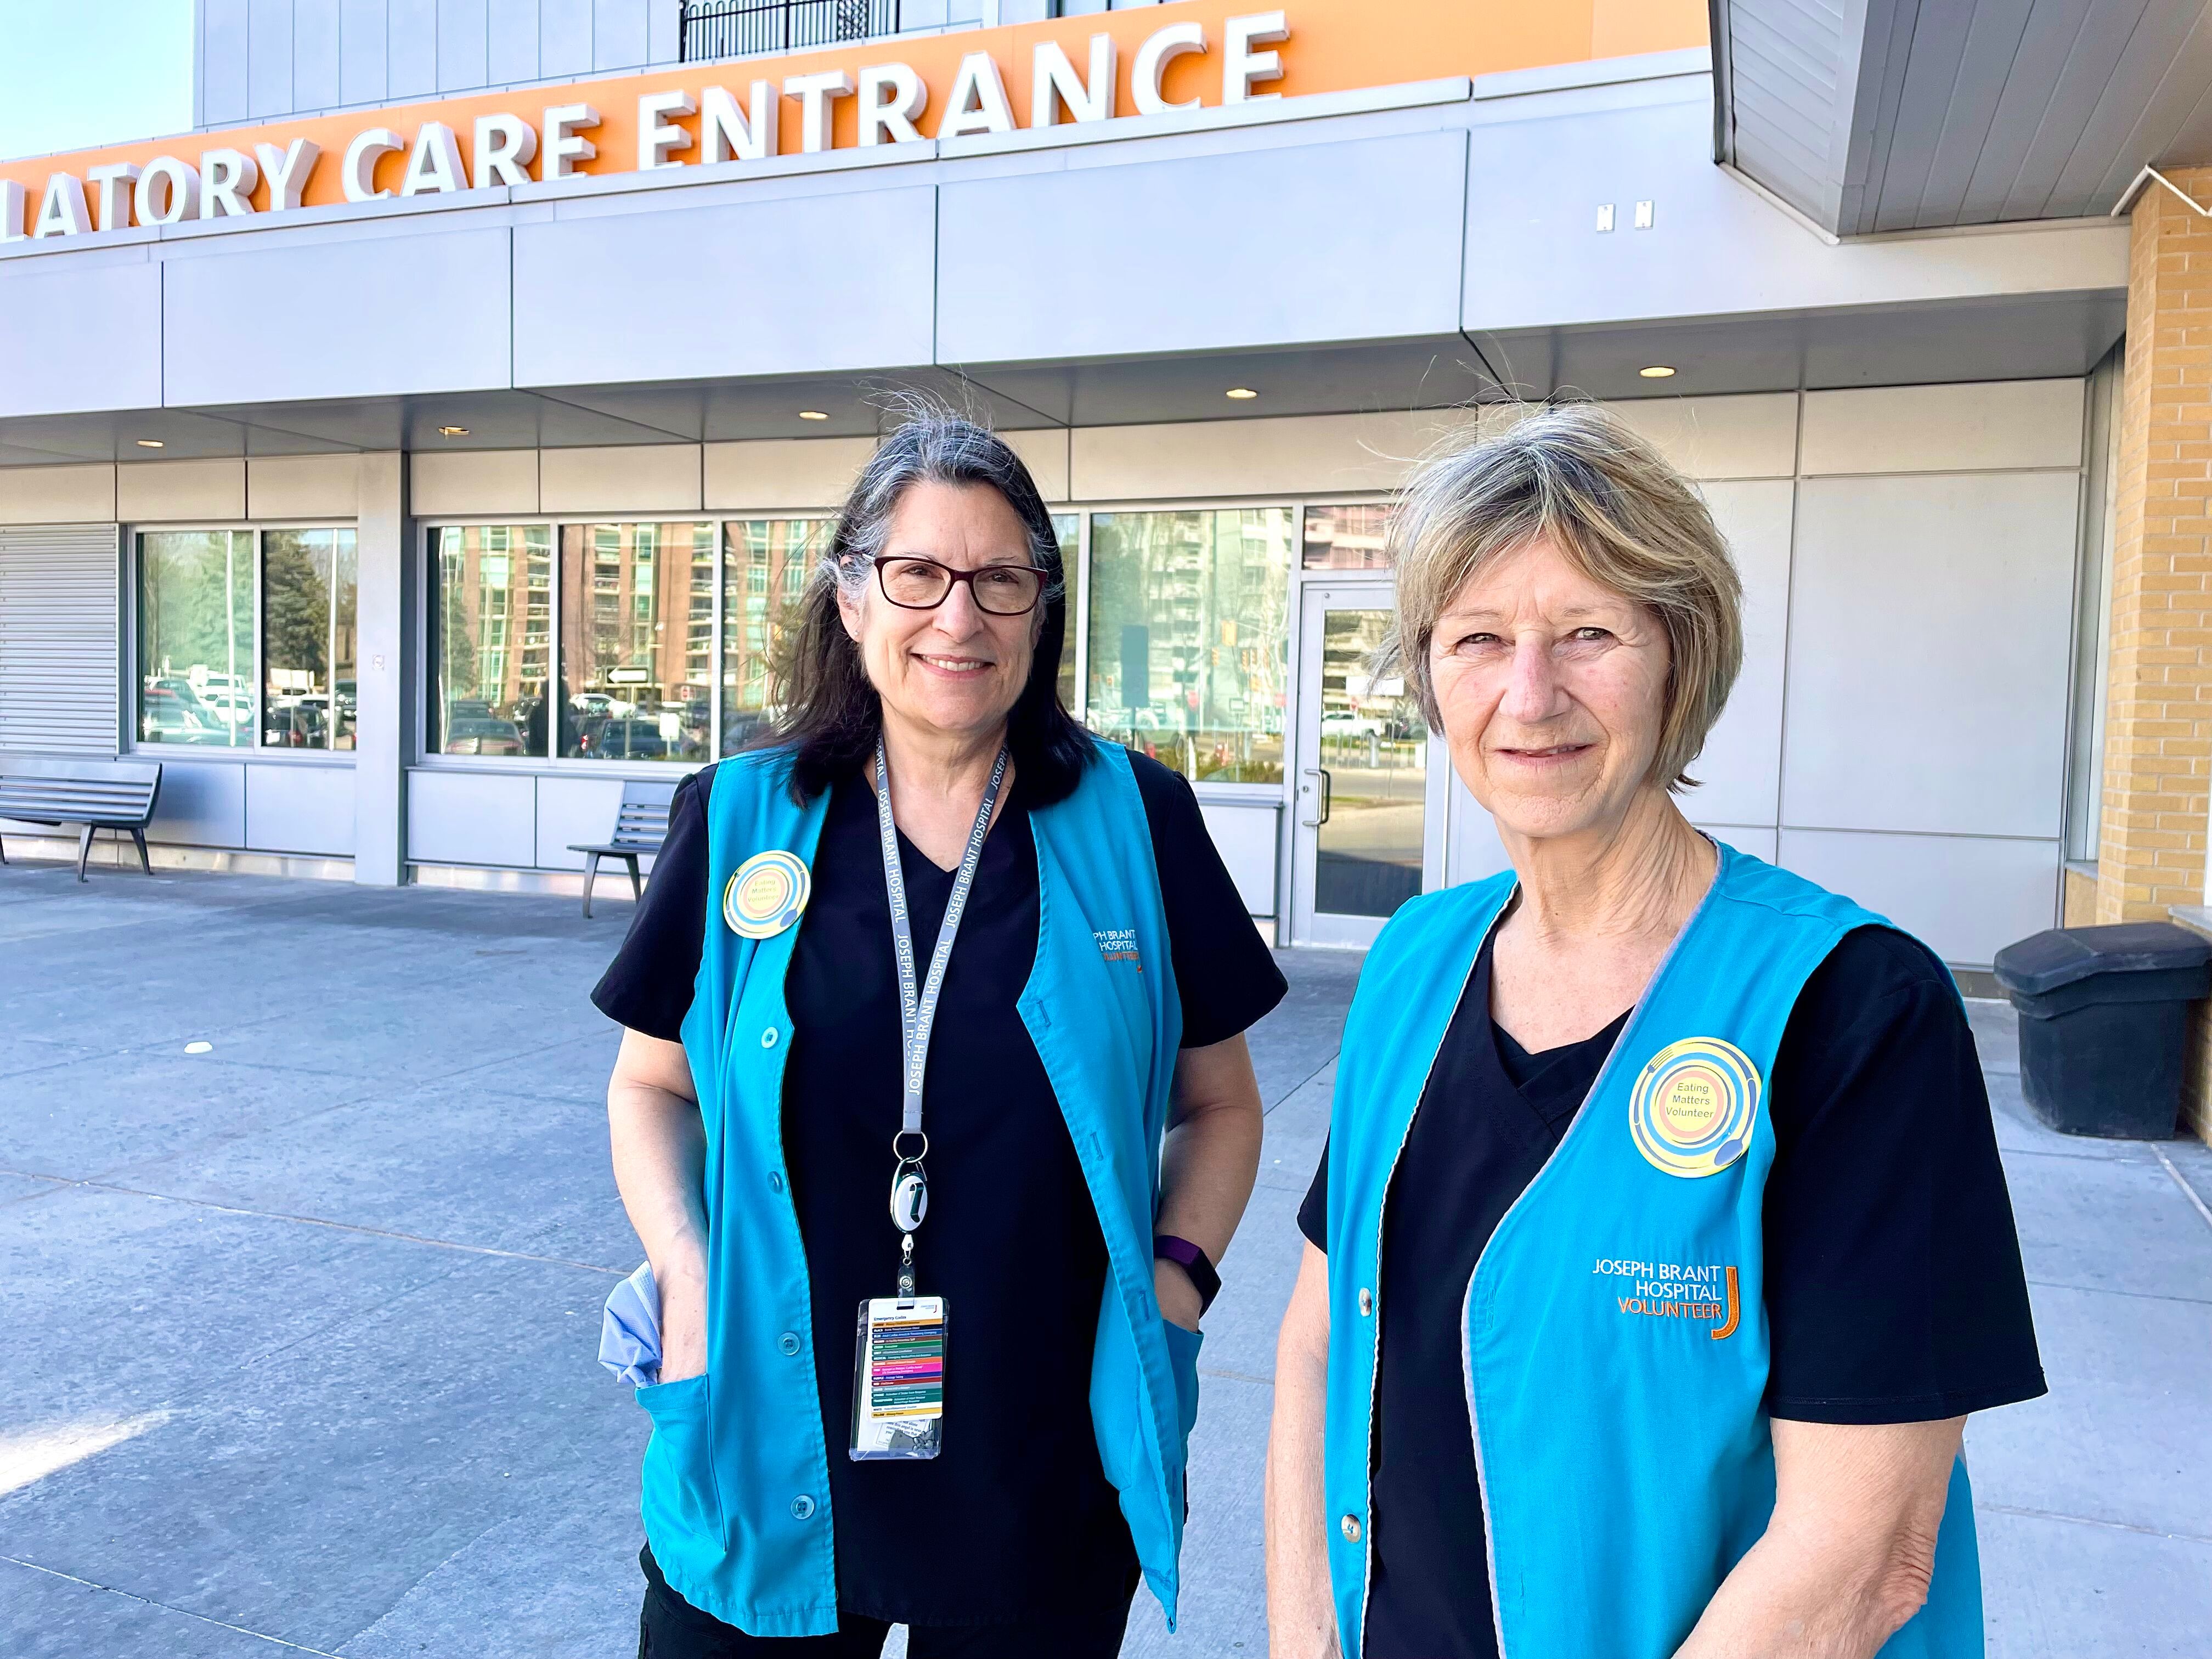 Two female volunteers wearing blue vests standing together outside of the hospital.